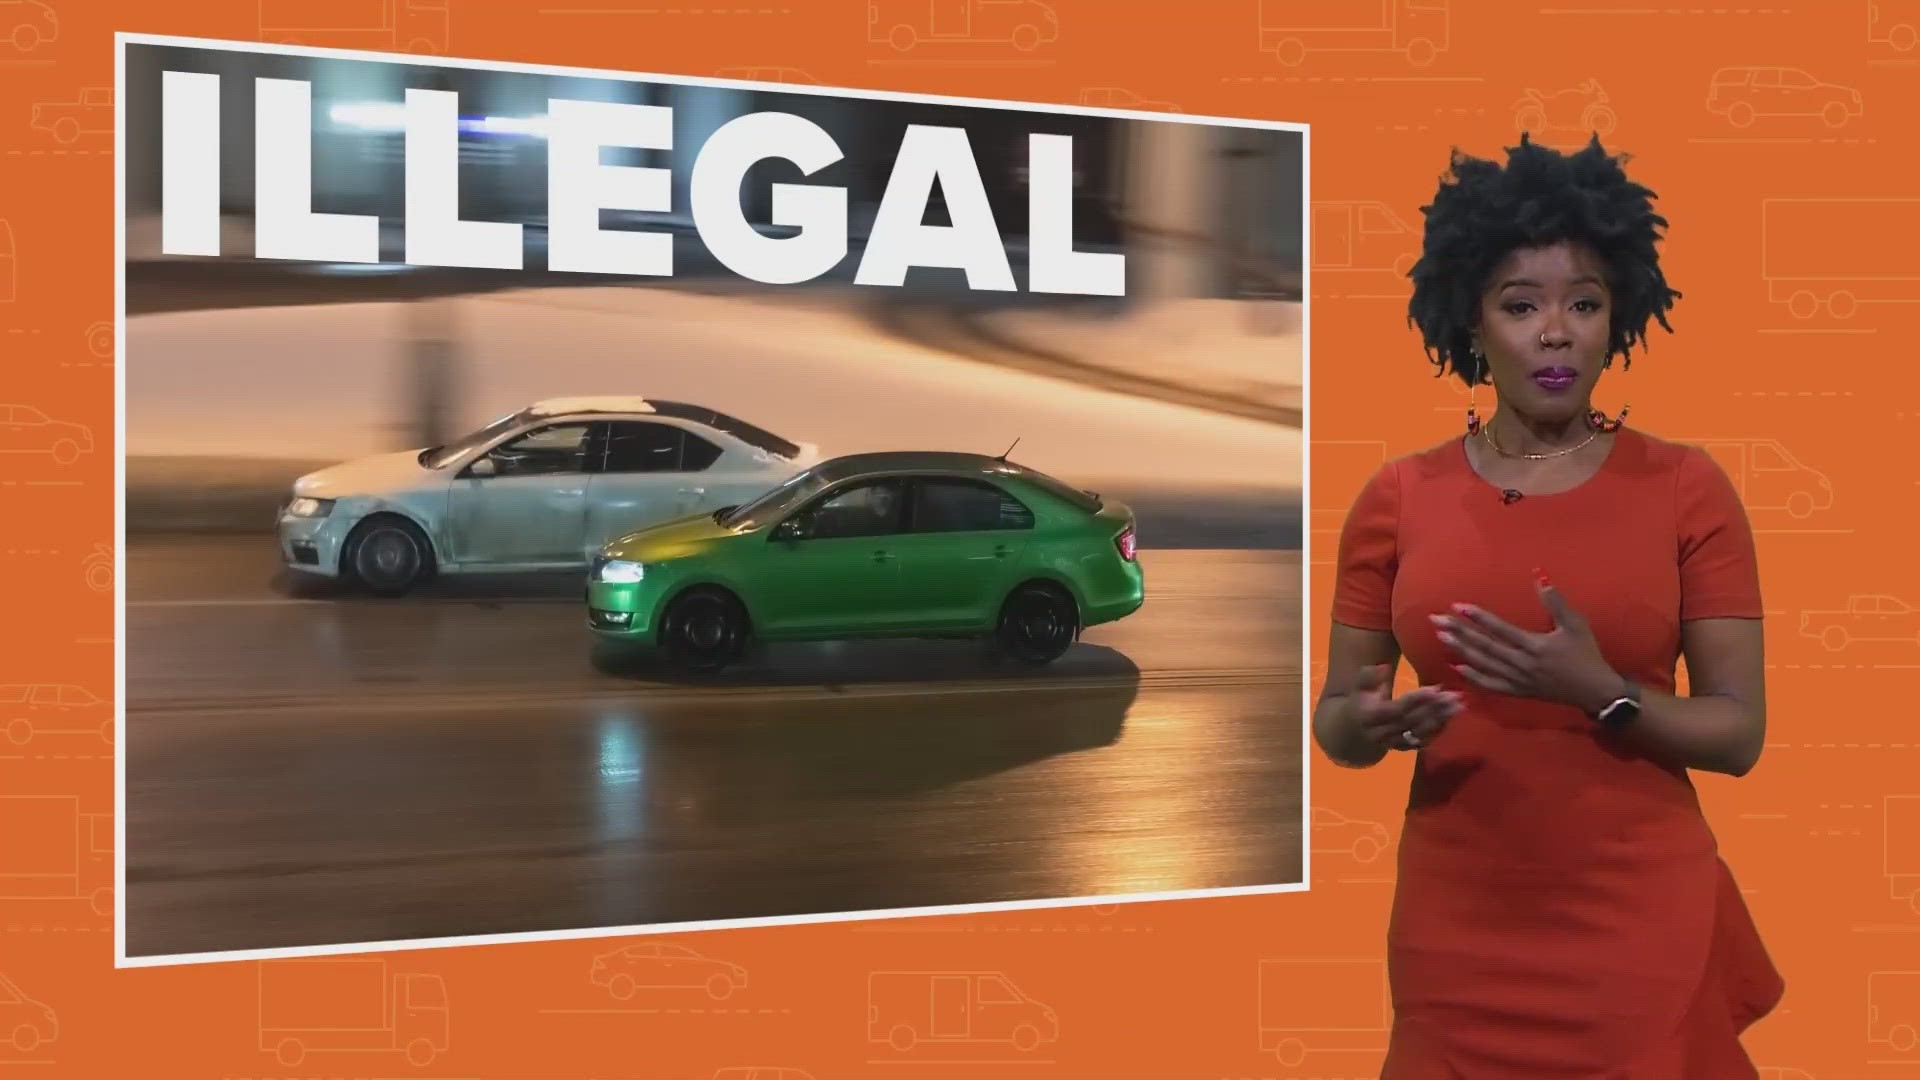 Street racing has been a rising issue in Texas. Tashara Parker has some tips on what to do if you see it happen near you.